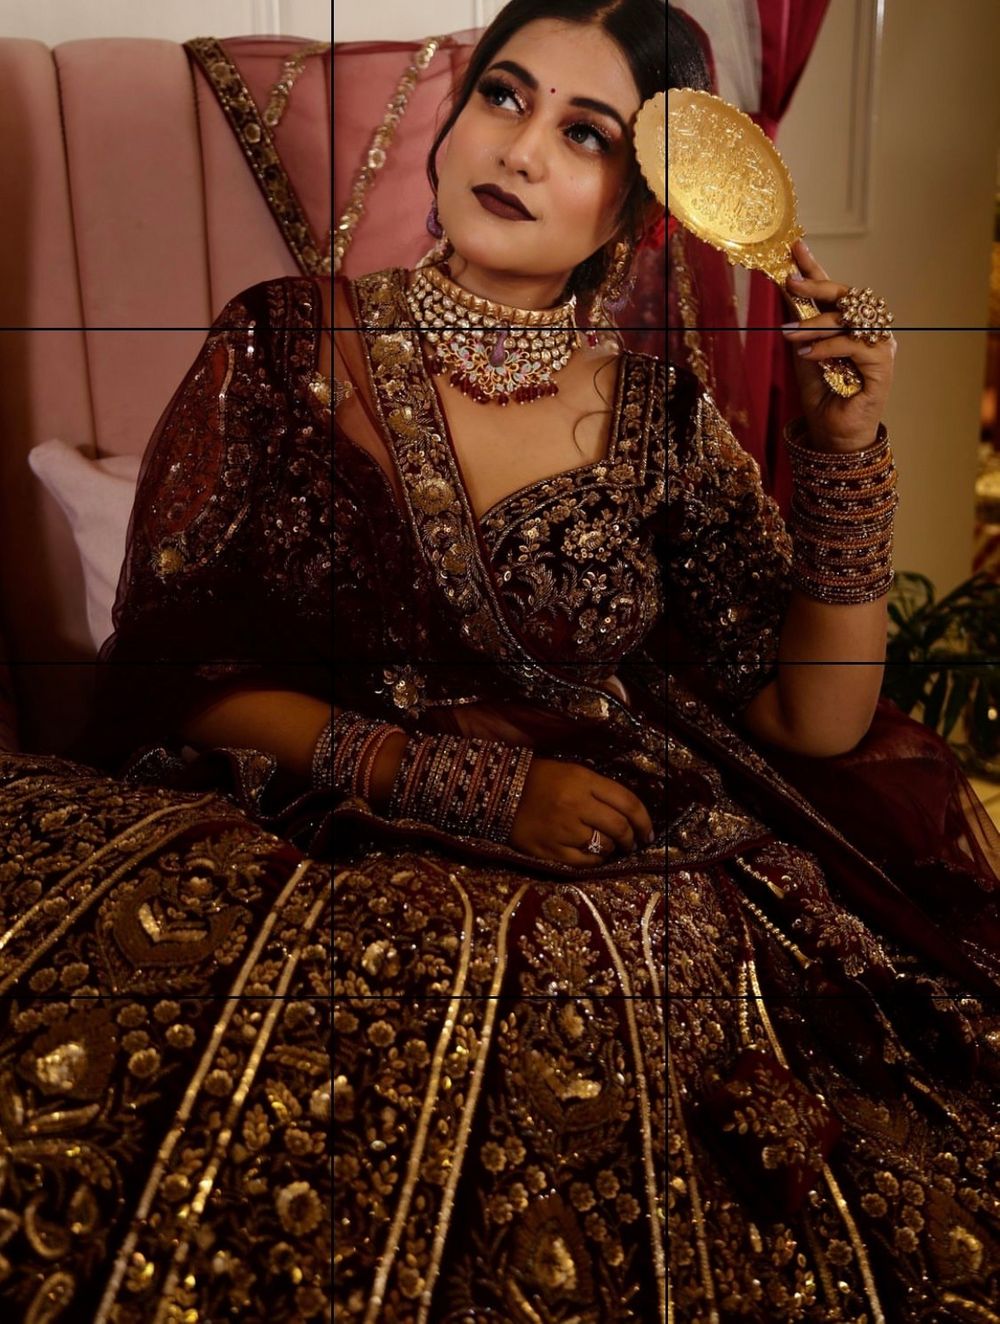 Photo From Brides - By Makeup Stories by Nandita